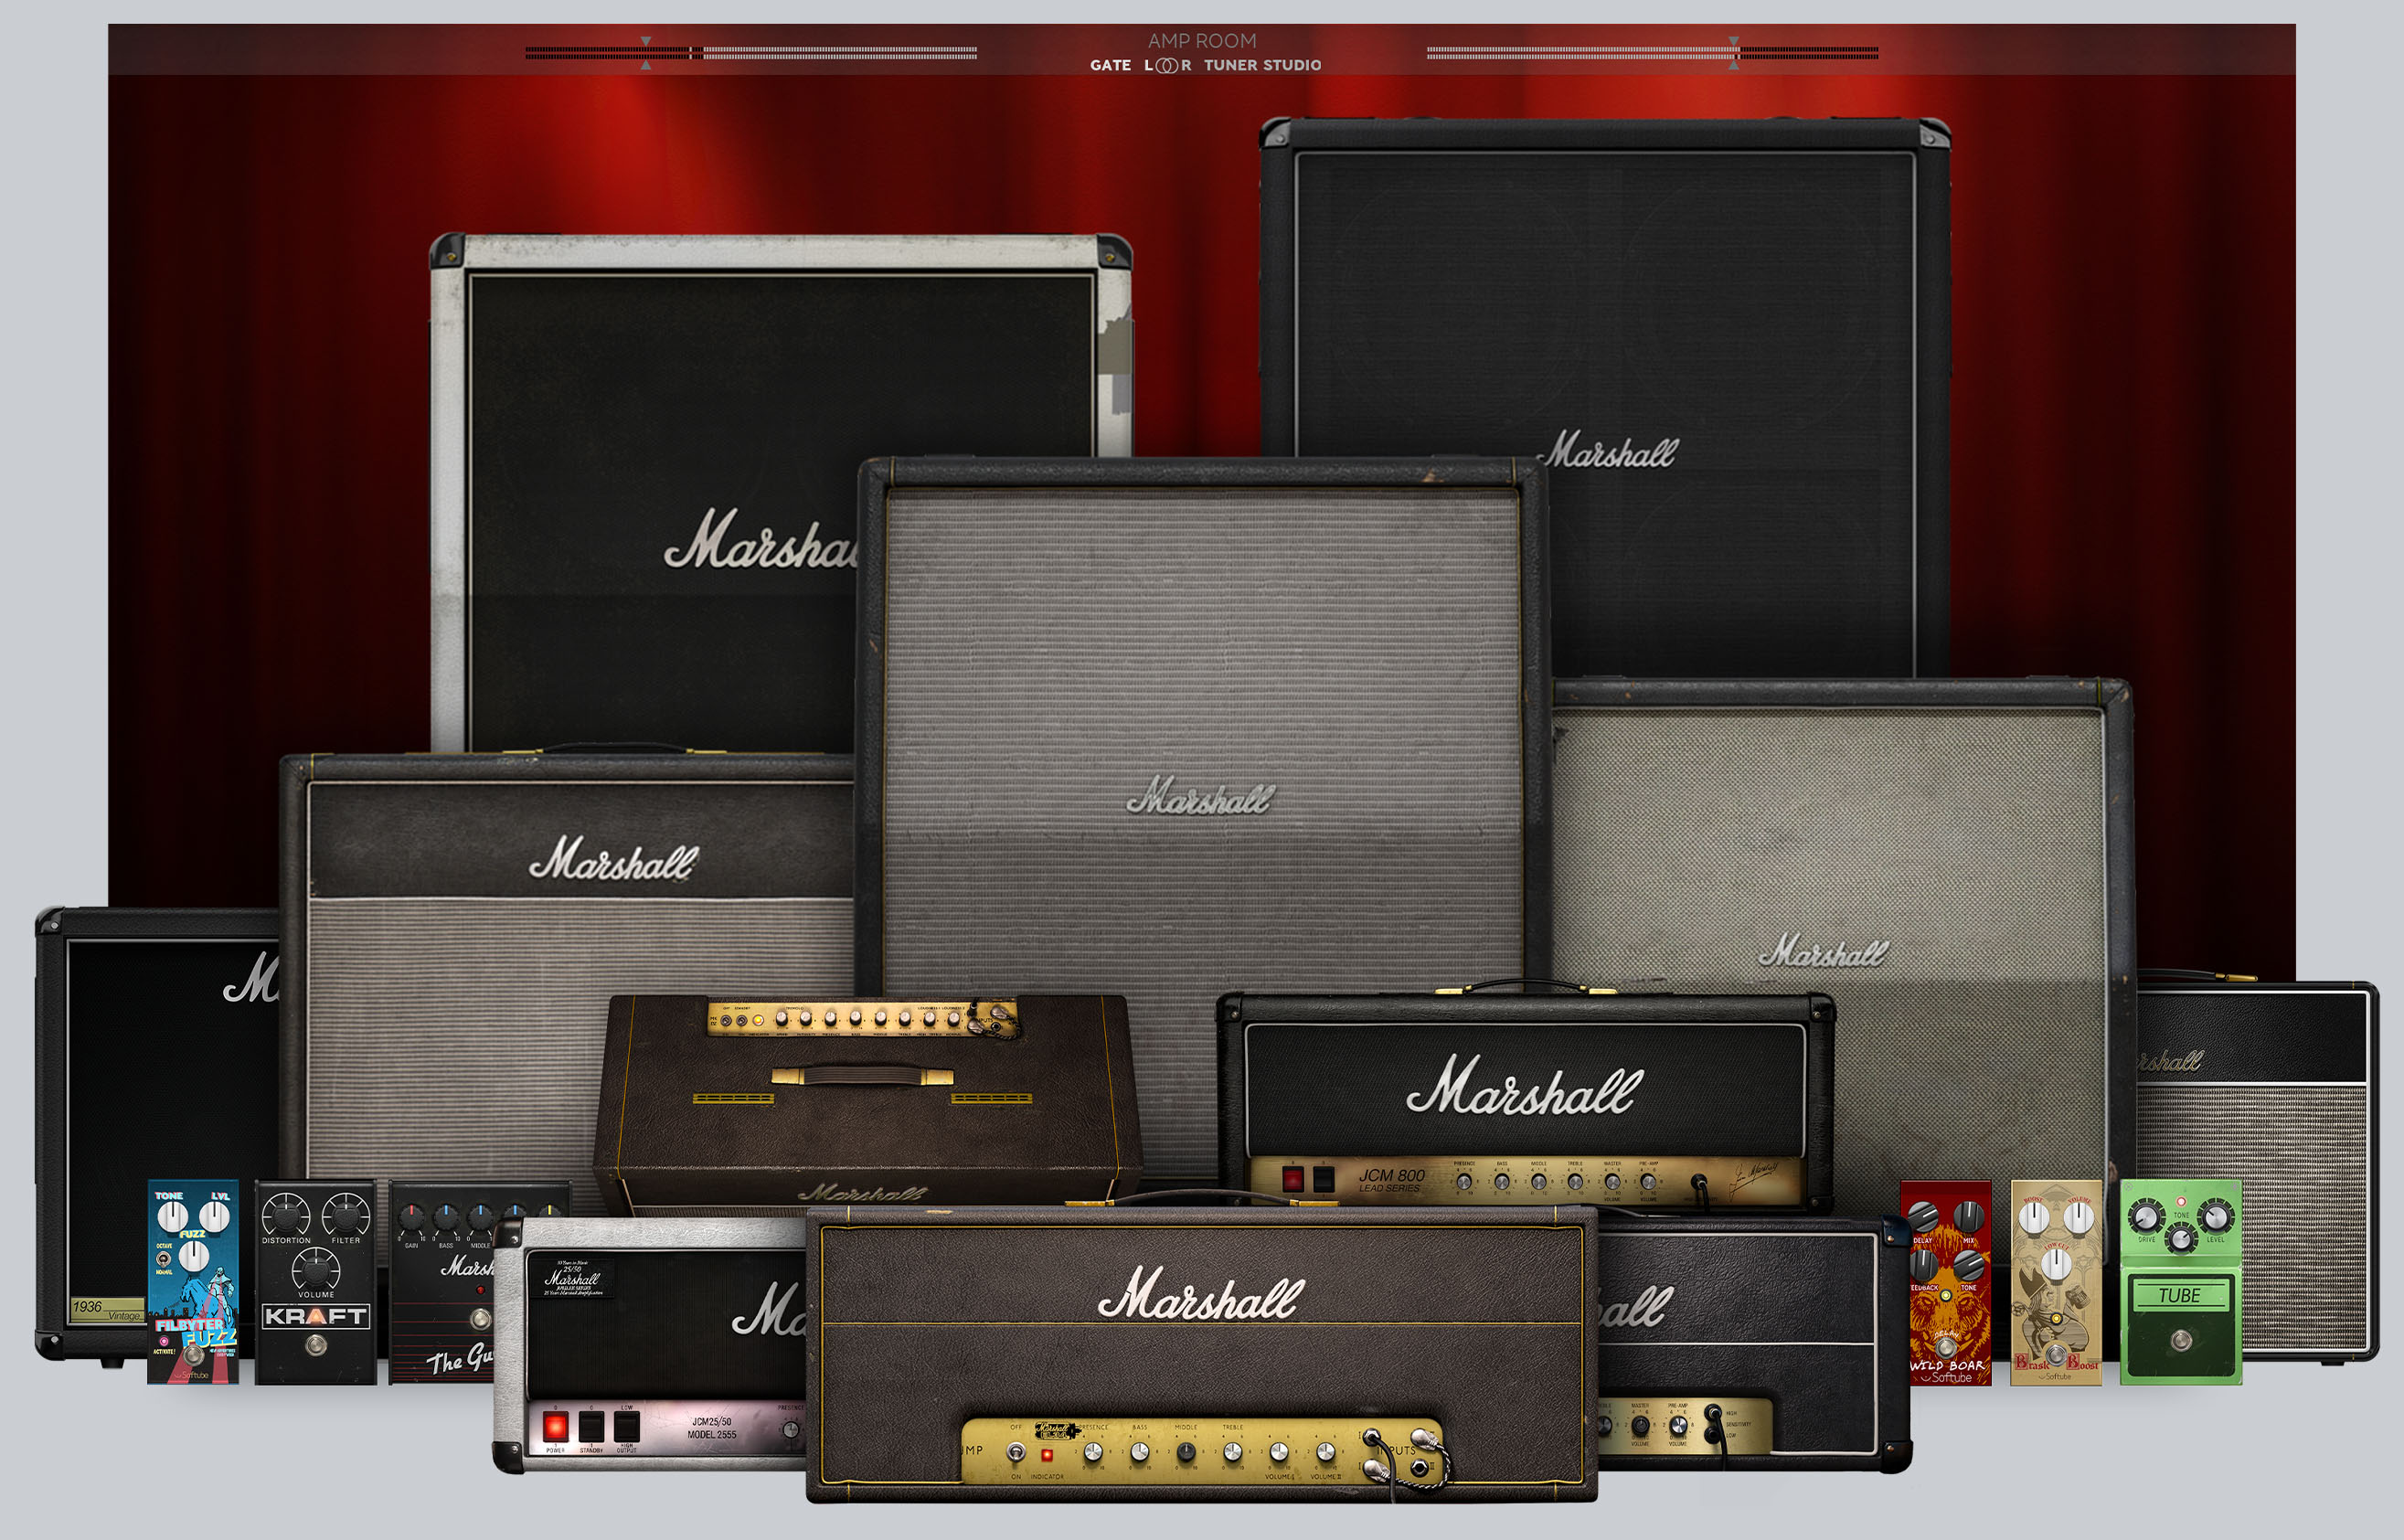 amp-room-marshall-suite-product-images-user-maunal.jpg